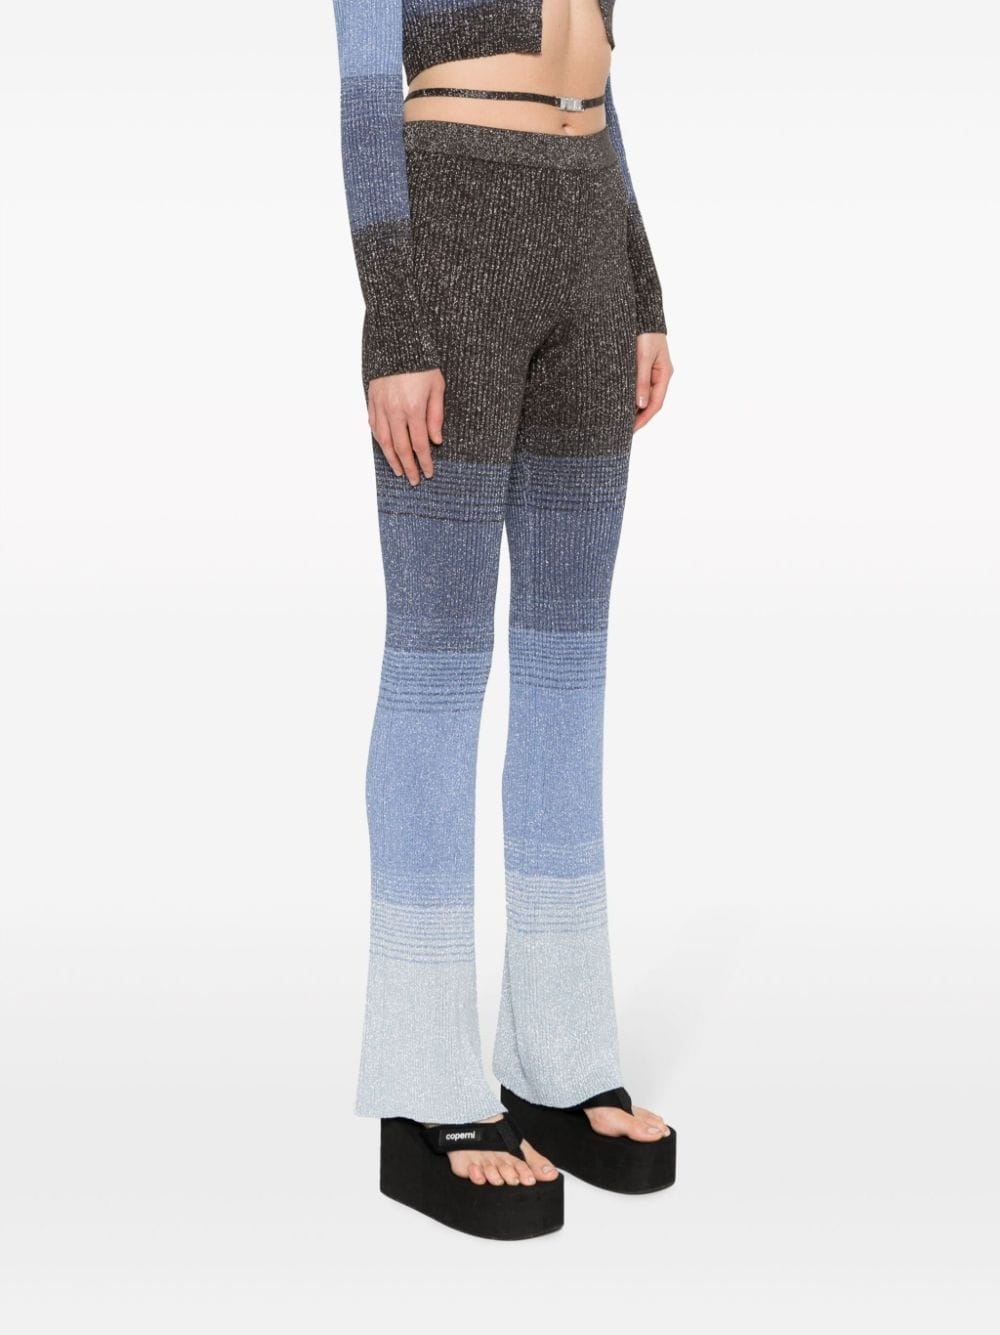 degradé striped knitted trousers - 3